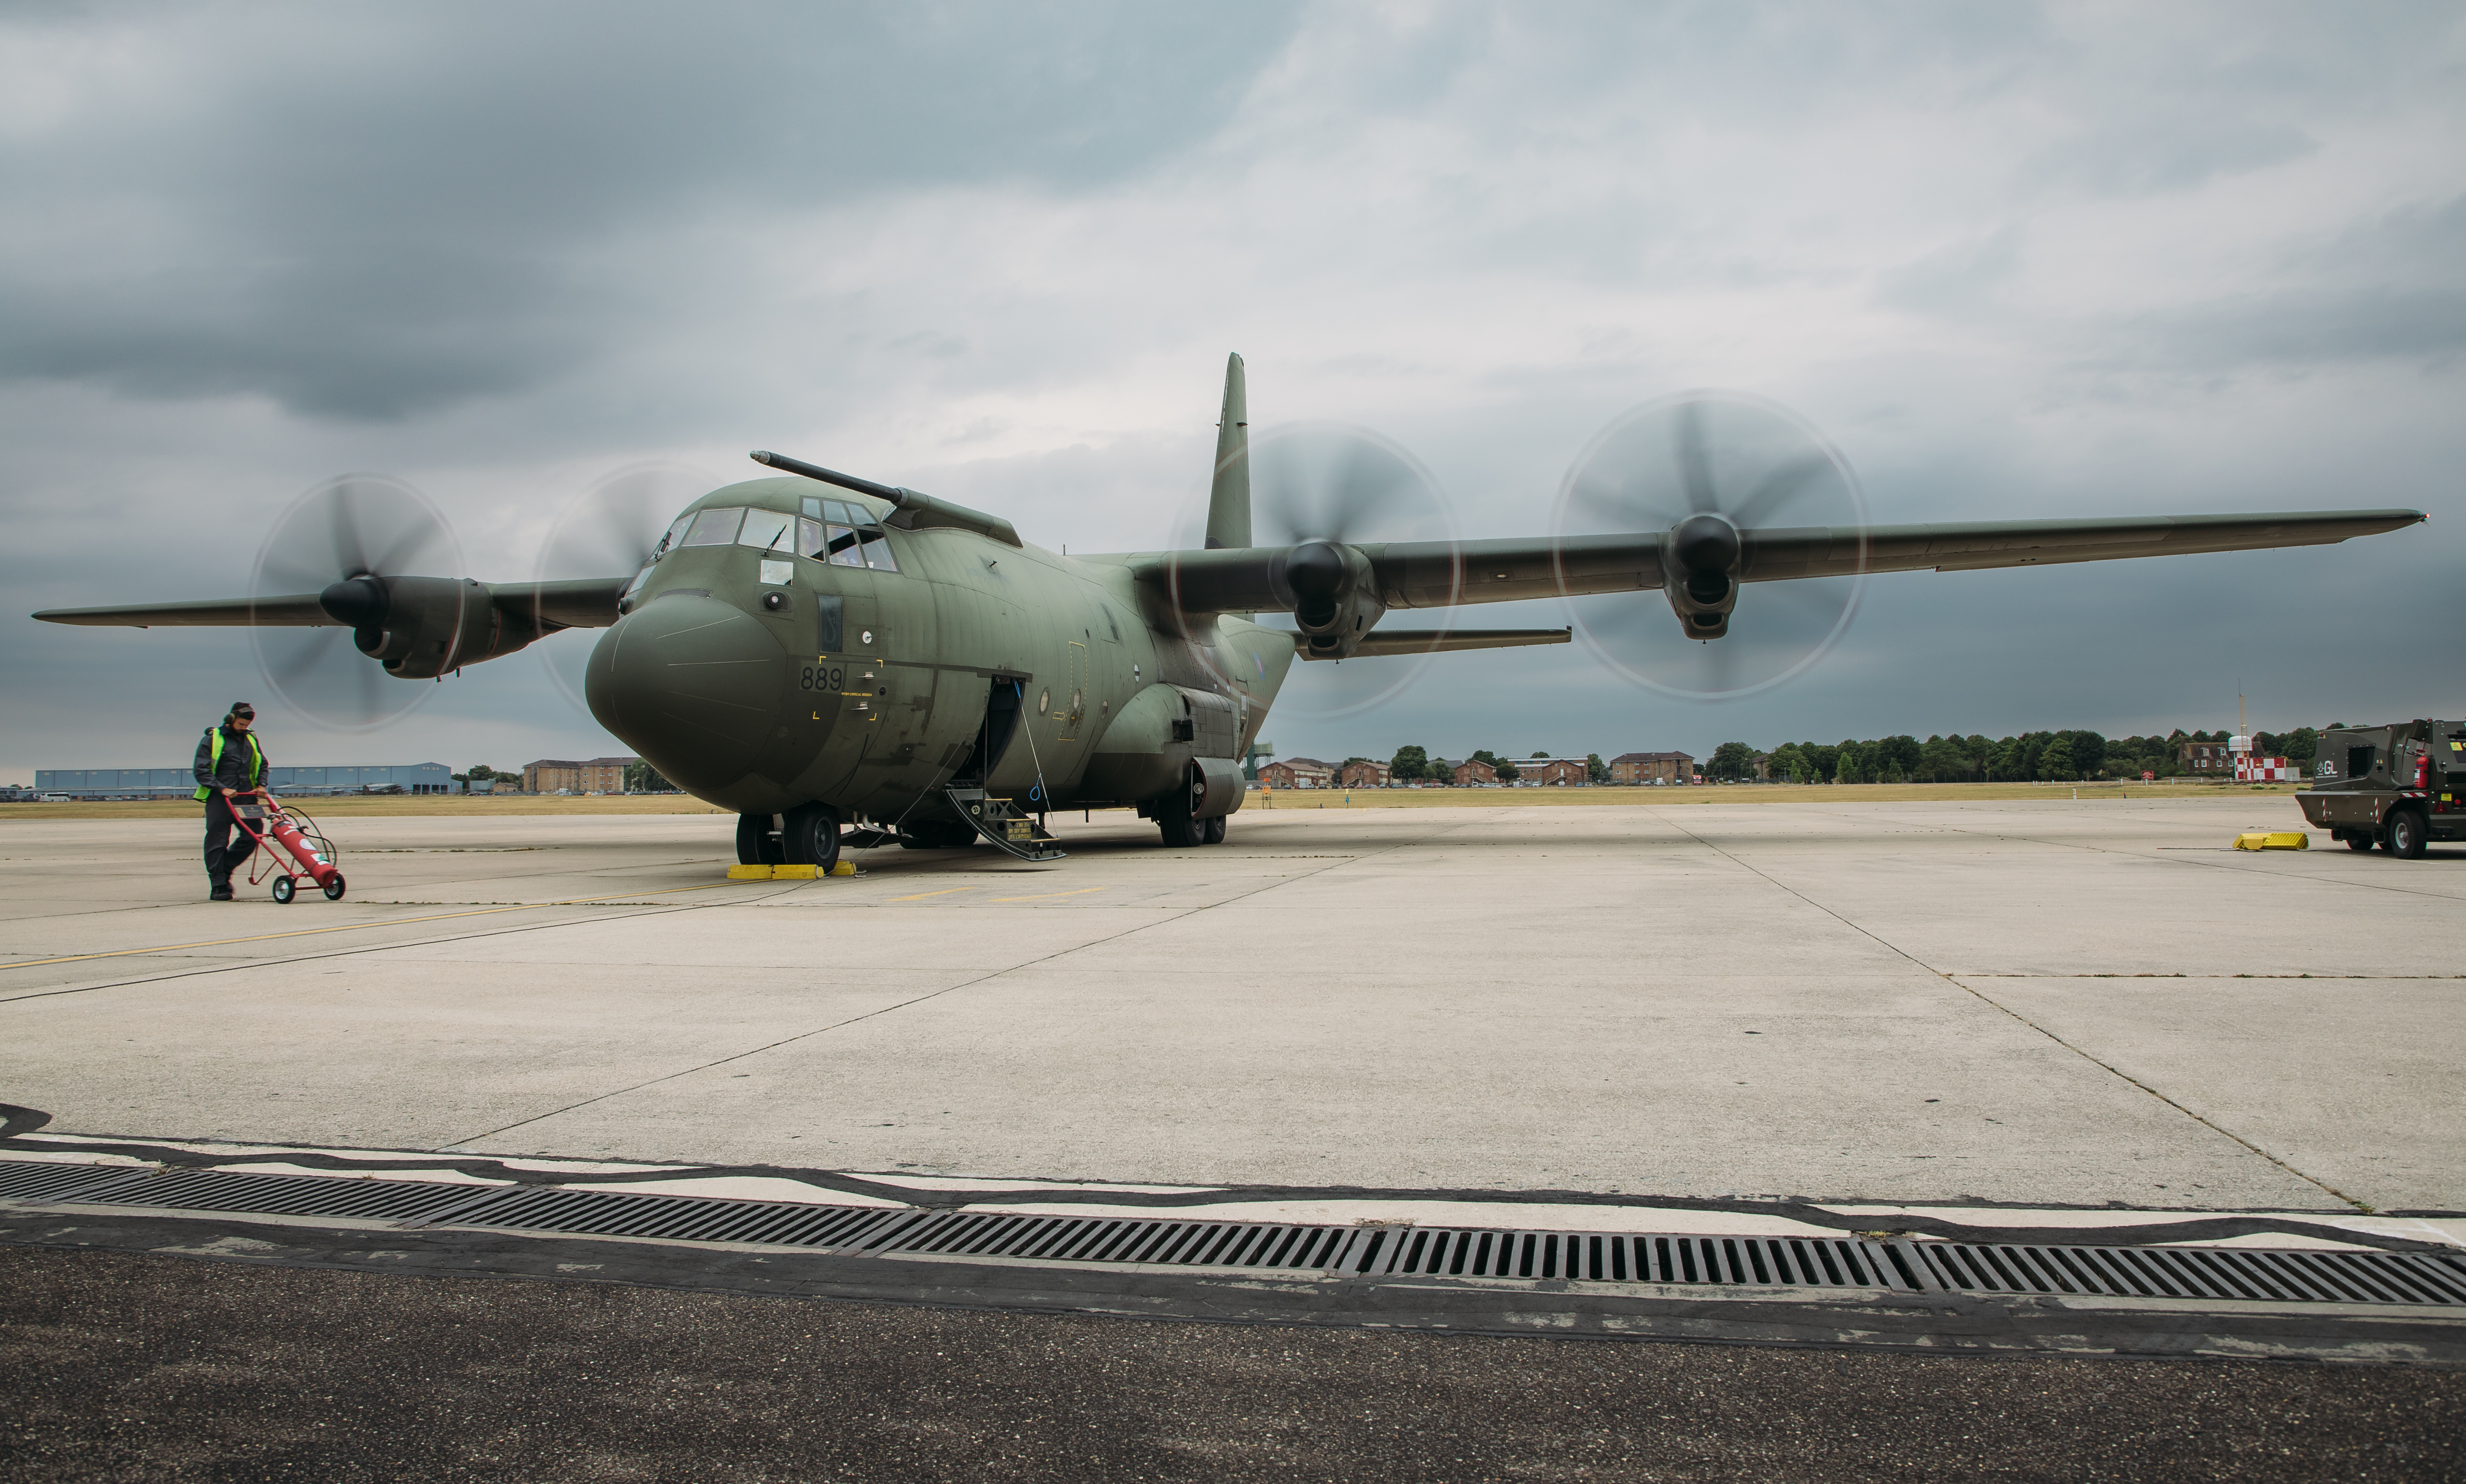 Image shows Hercules aircraft on the airfield.